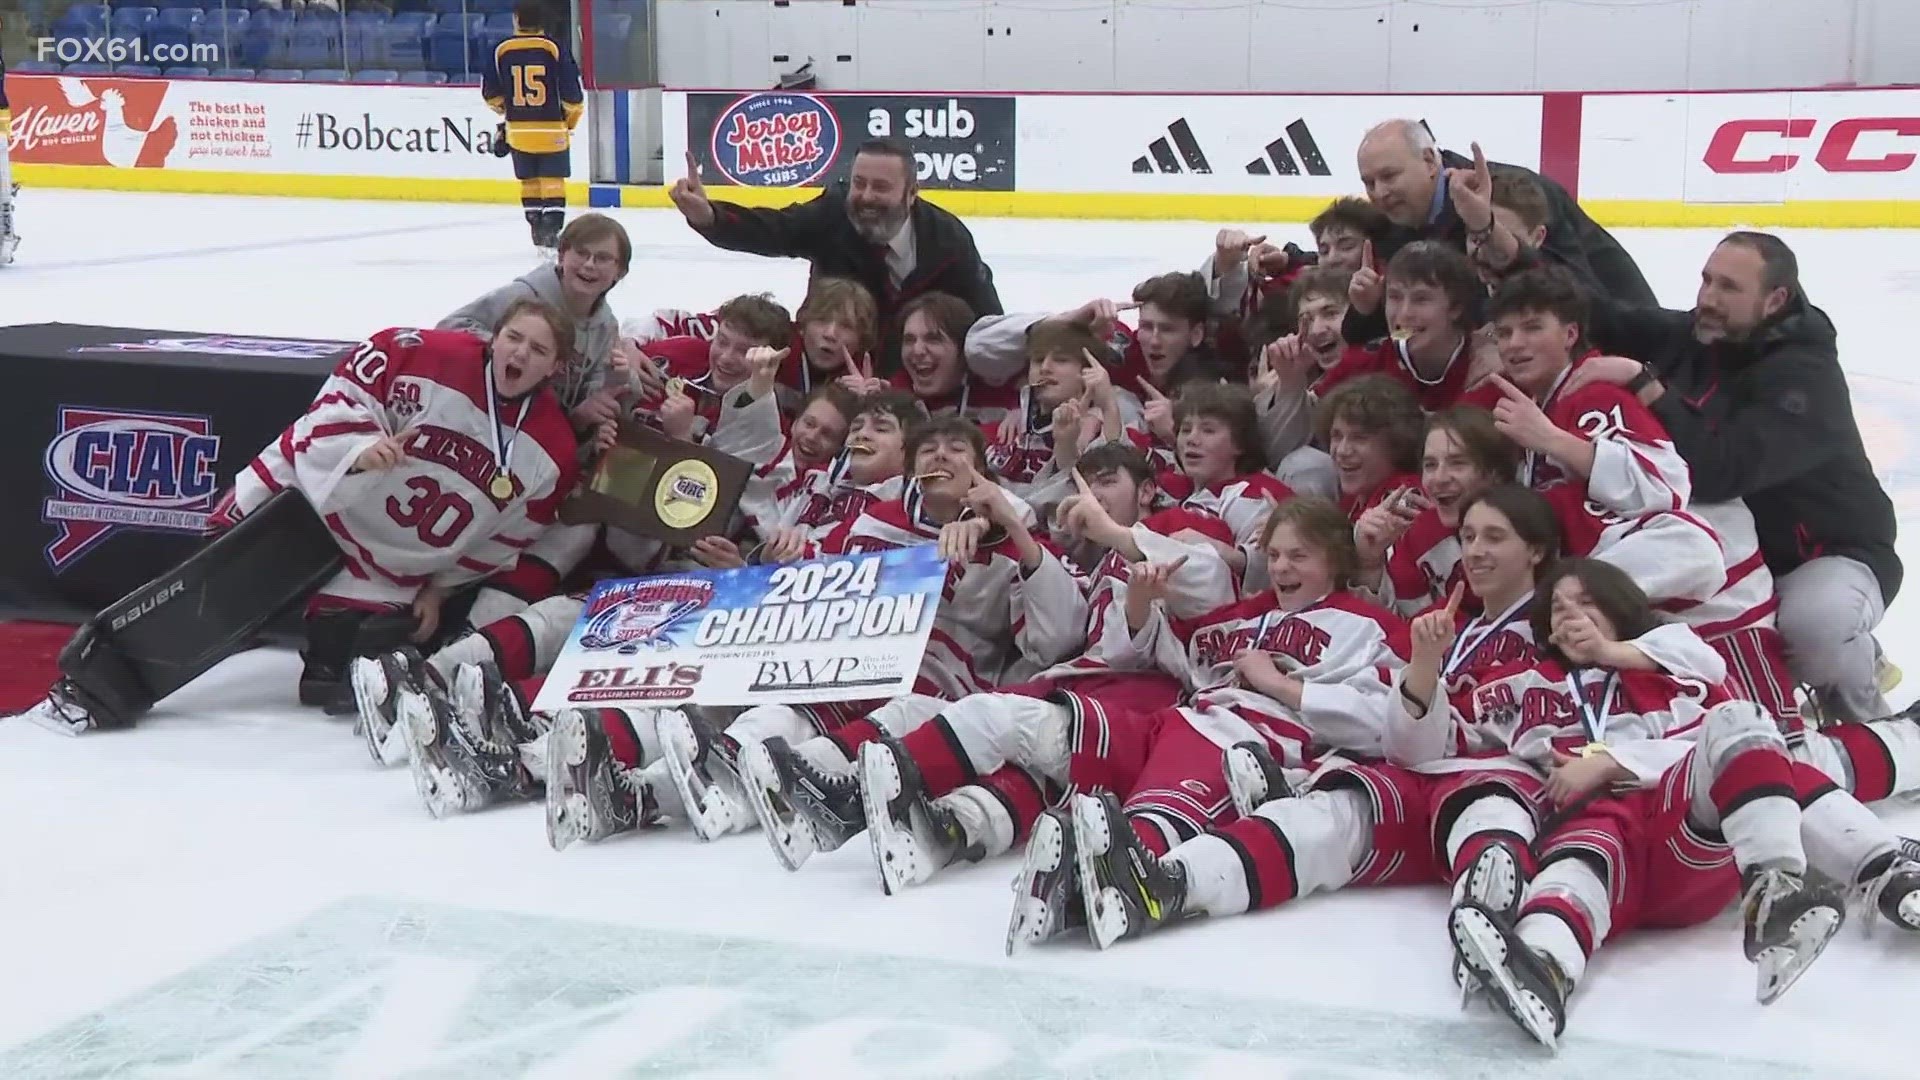 Cheshire defeated East Haven Co-op by a score of 6-3 to earn the Division II championship, the fifth title in program history and the first in 13 years.